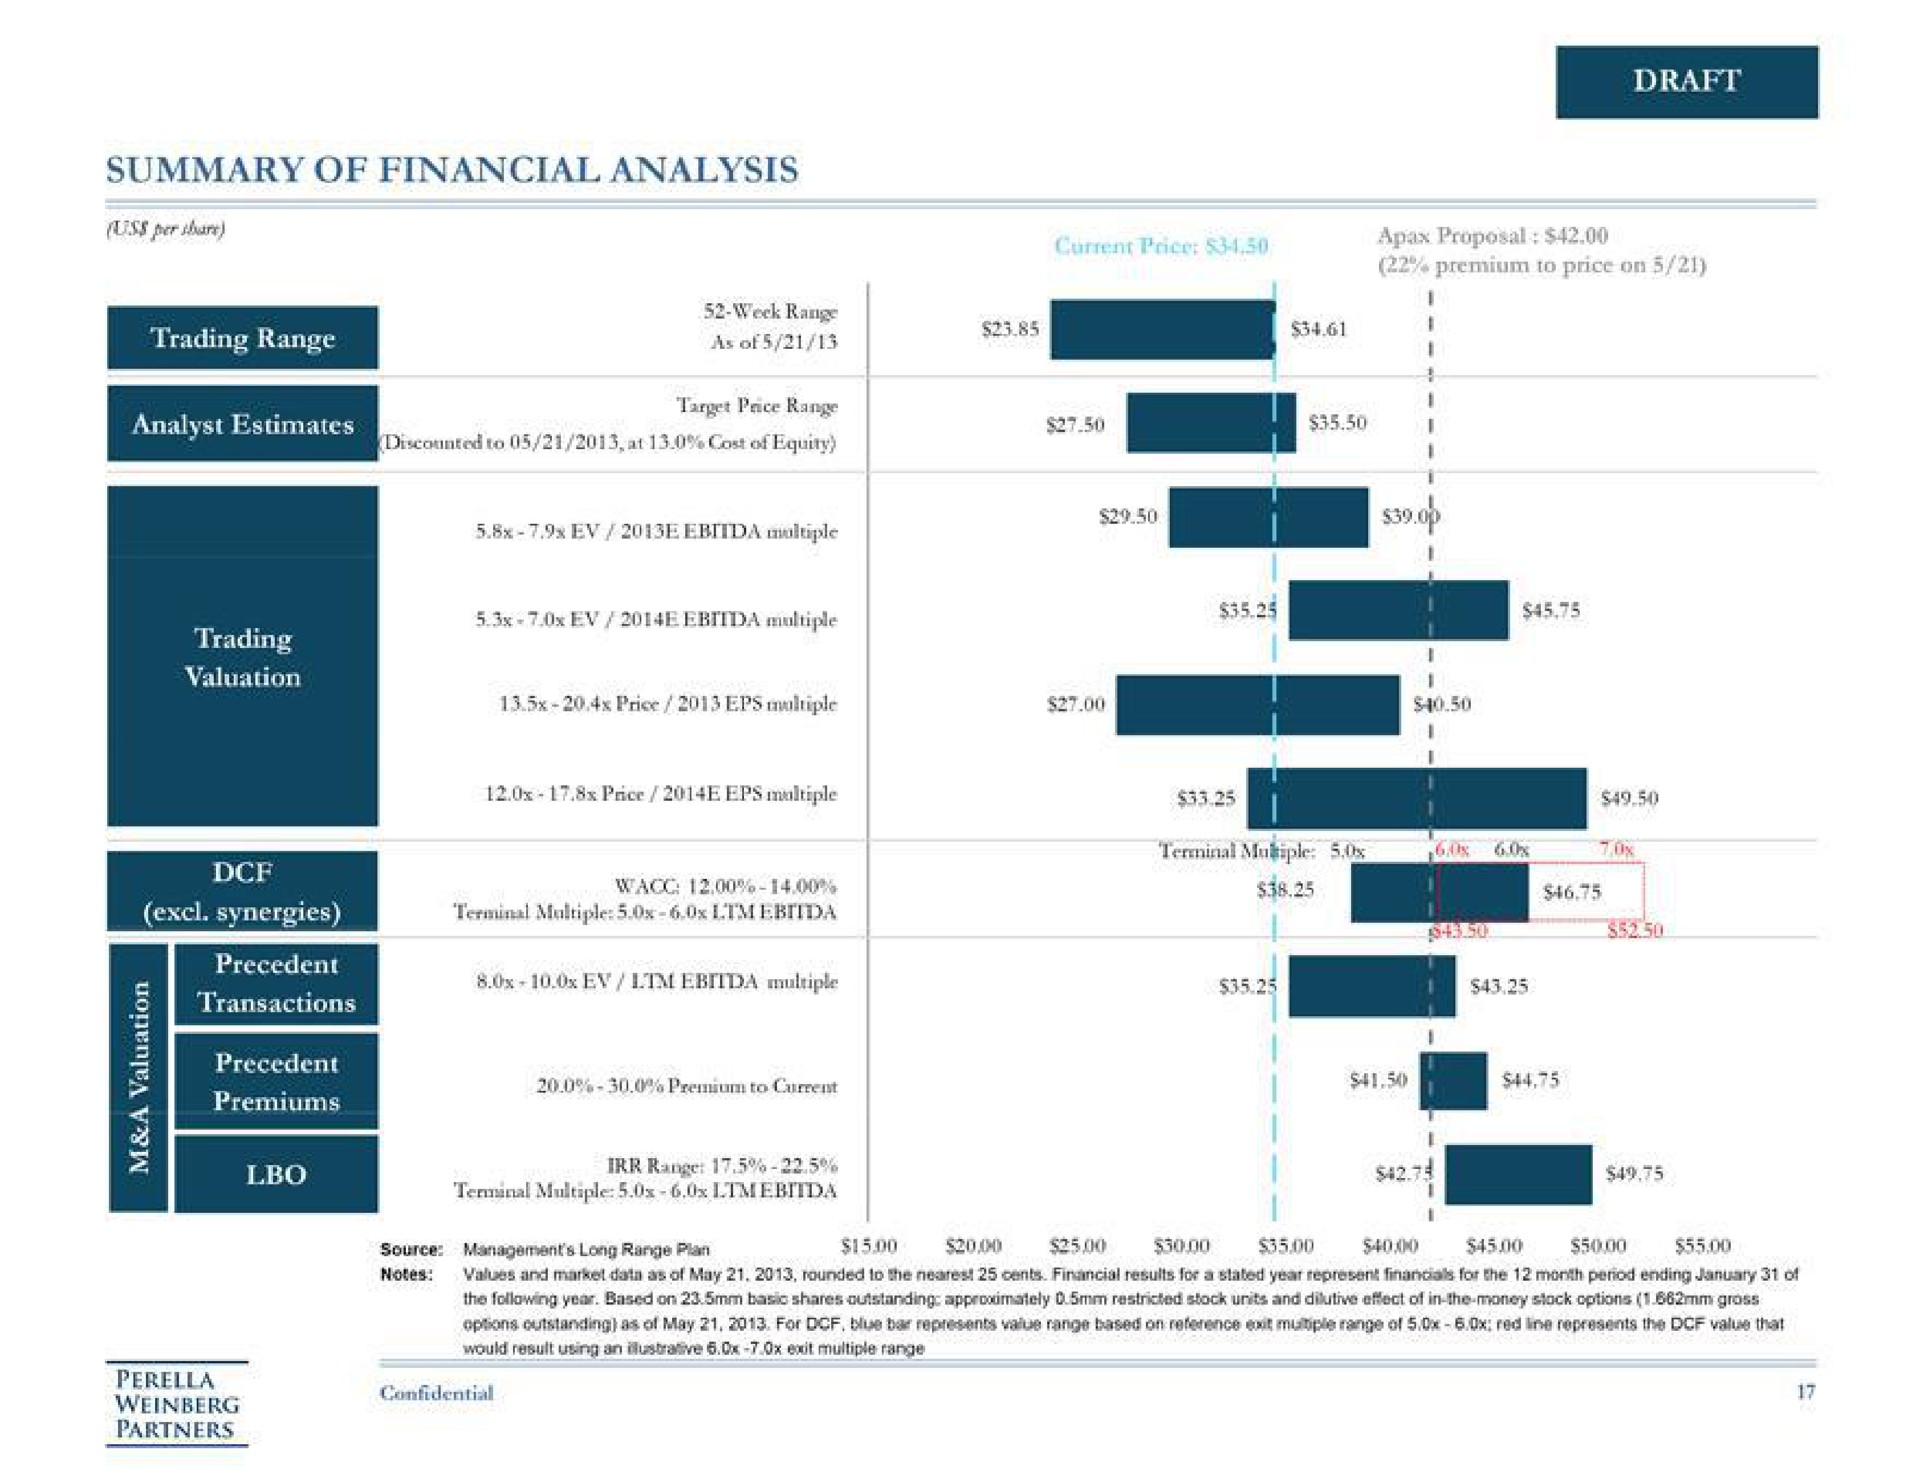 summary of financial analysis as of synergies terminal multiple range | Perella Weinberg Partners